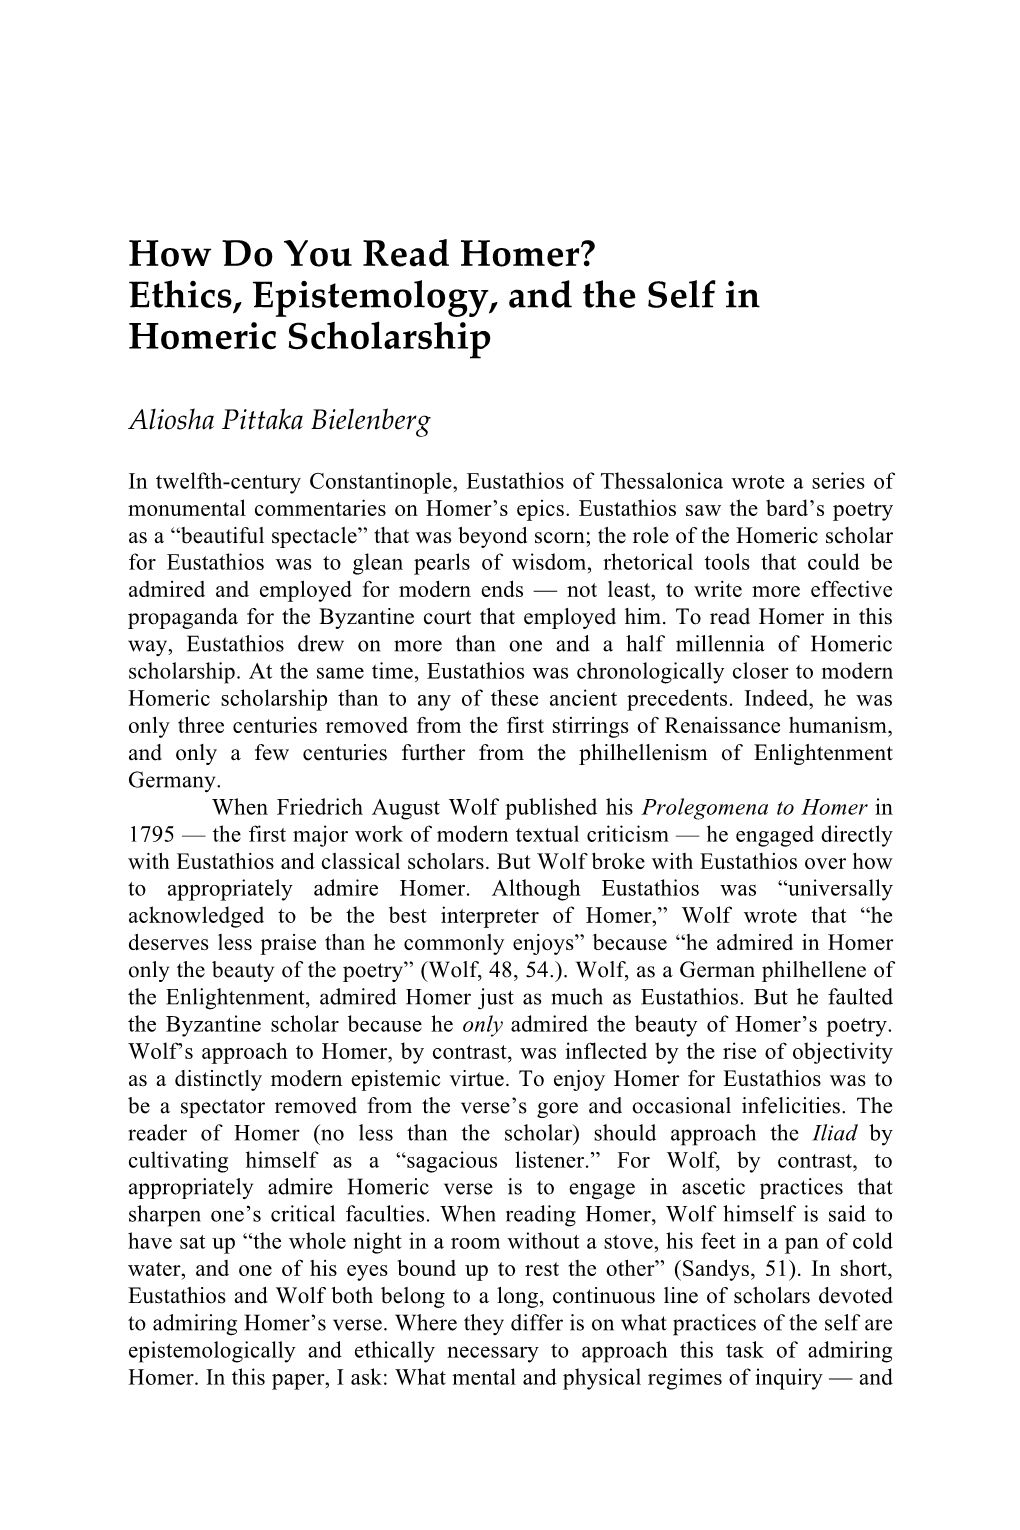 How Do You Read Homer? Ethics, Epistemology, and the Self in Homeric Scholarship